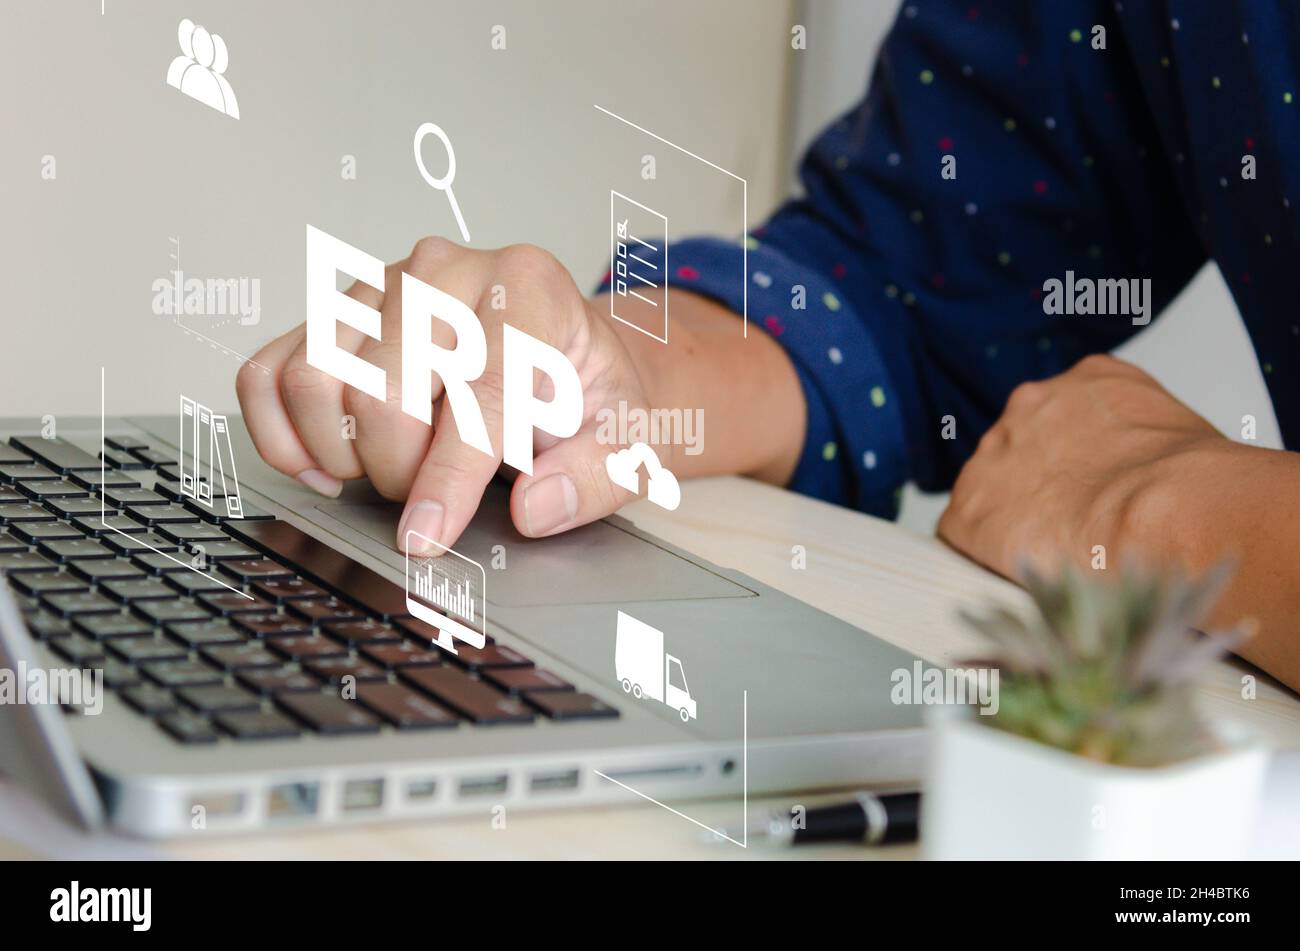 Enterprise Resource Planning (ERP) Software system for business resource plans. concept hand typing computer laptop icons on virtual screen. Stock Photo